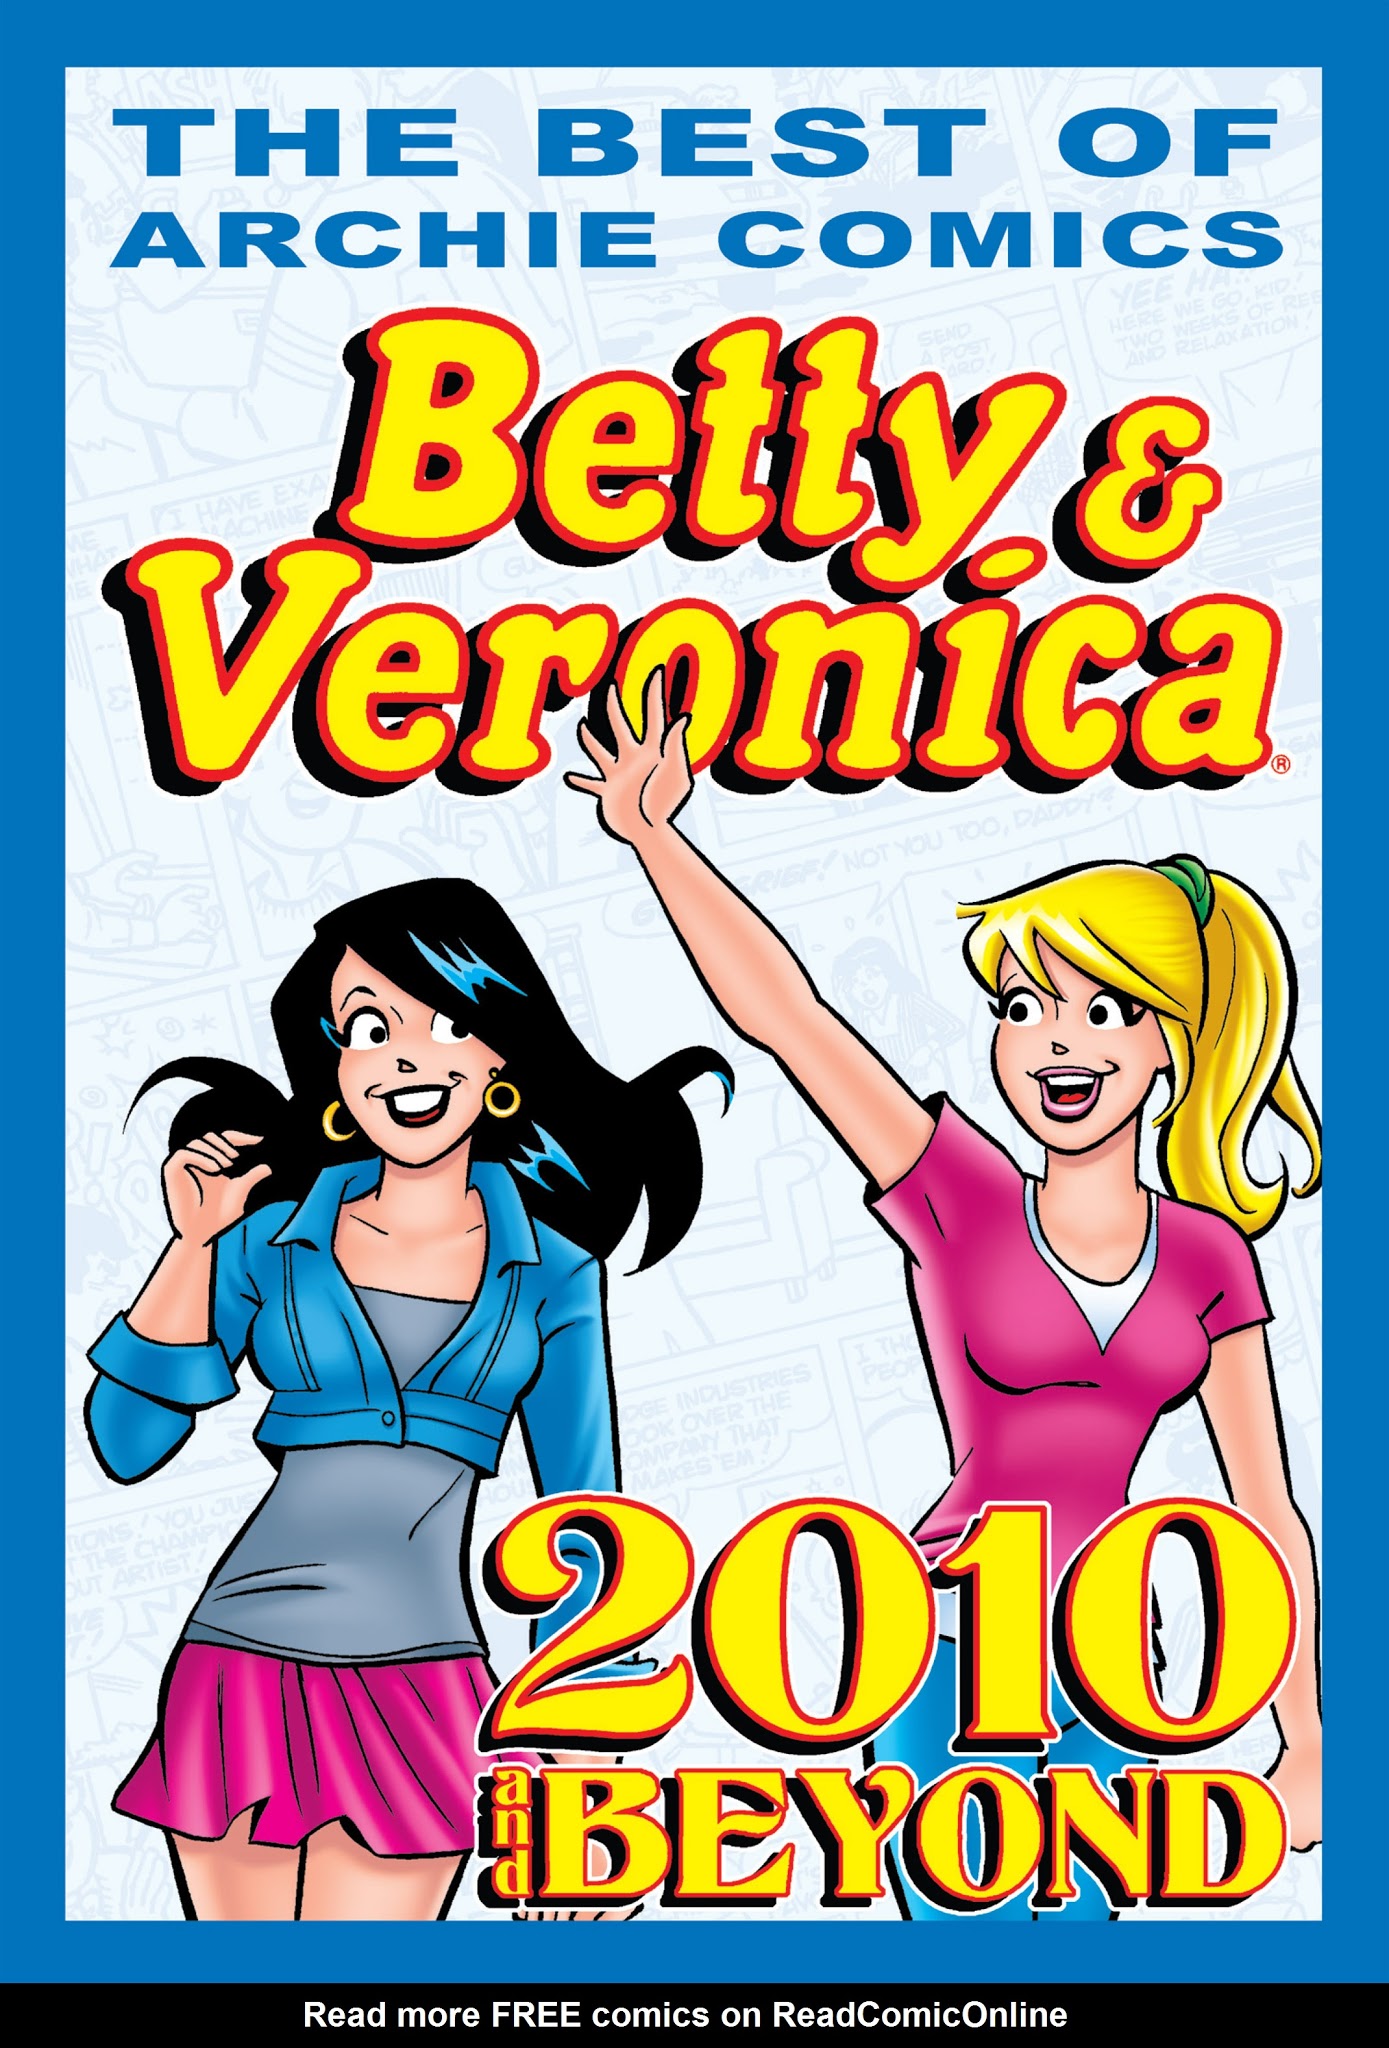 Read online The Best of Archie Comics: Betty & Veronica comic -  Issue # TPB - 326